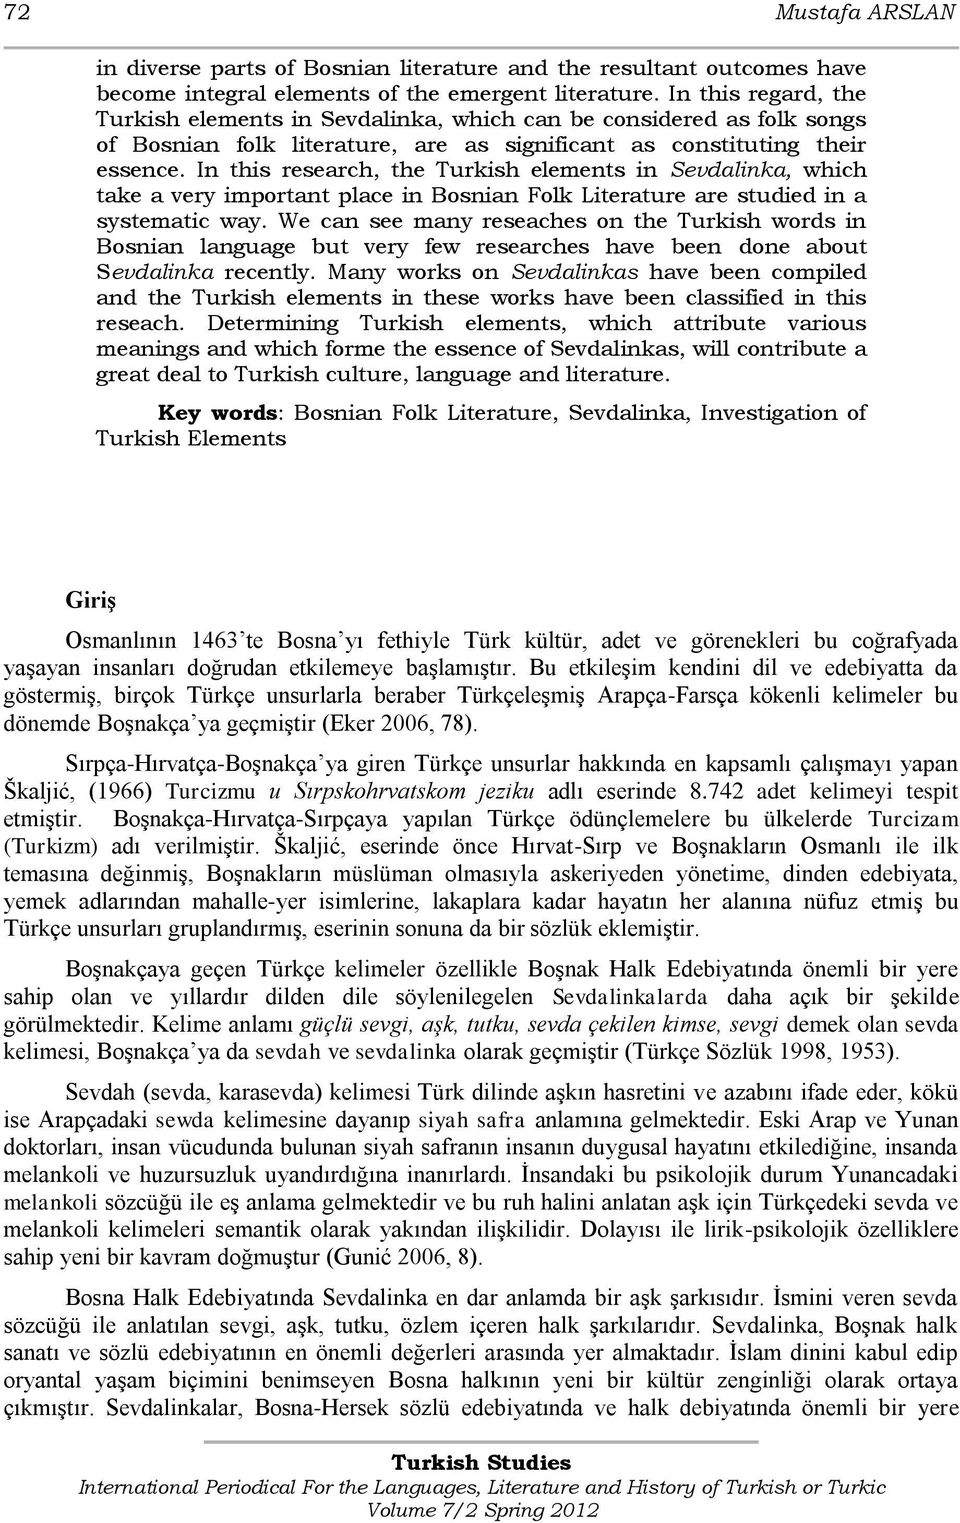 In this research, the Turkish elements in Sevdalinka, which take a very important place in Bosnian Folk Literature are studied in a systematic way.